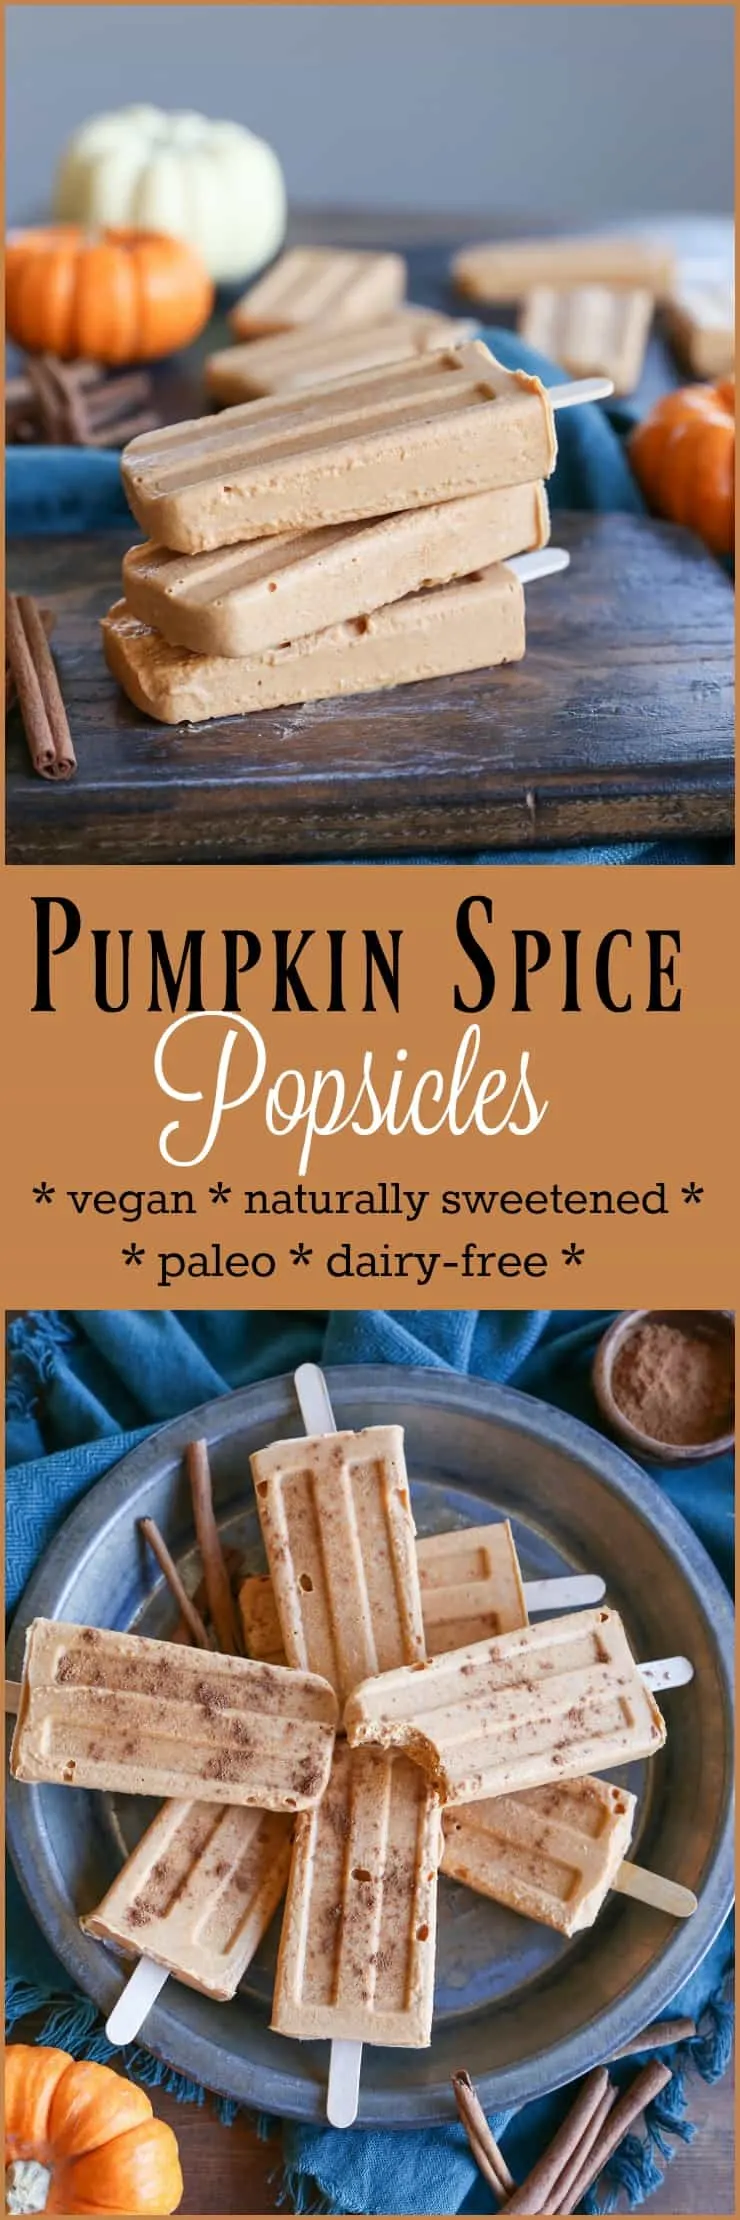 Pumpkin Spice Popsicles - only 3 ingredients needed for this easy vegan, paleo dessert recipe!